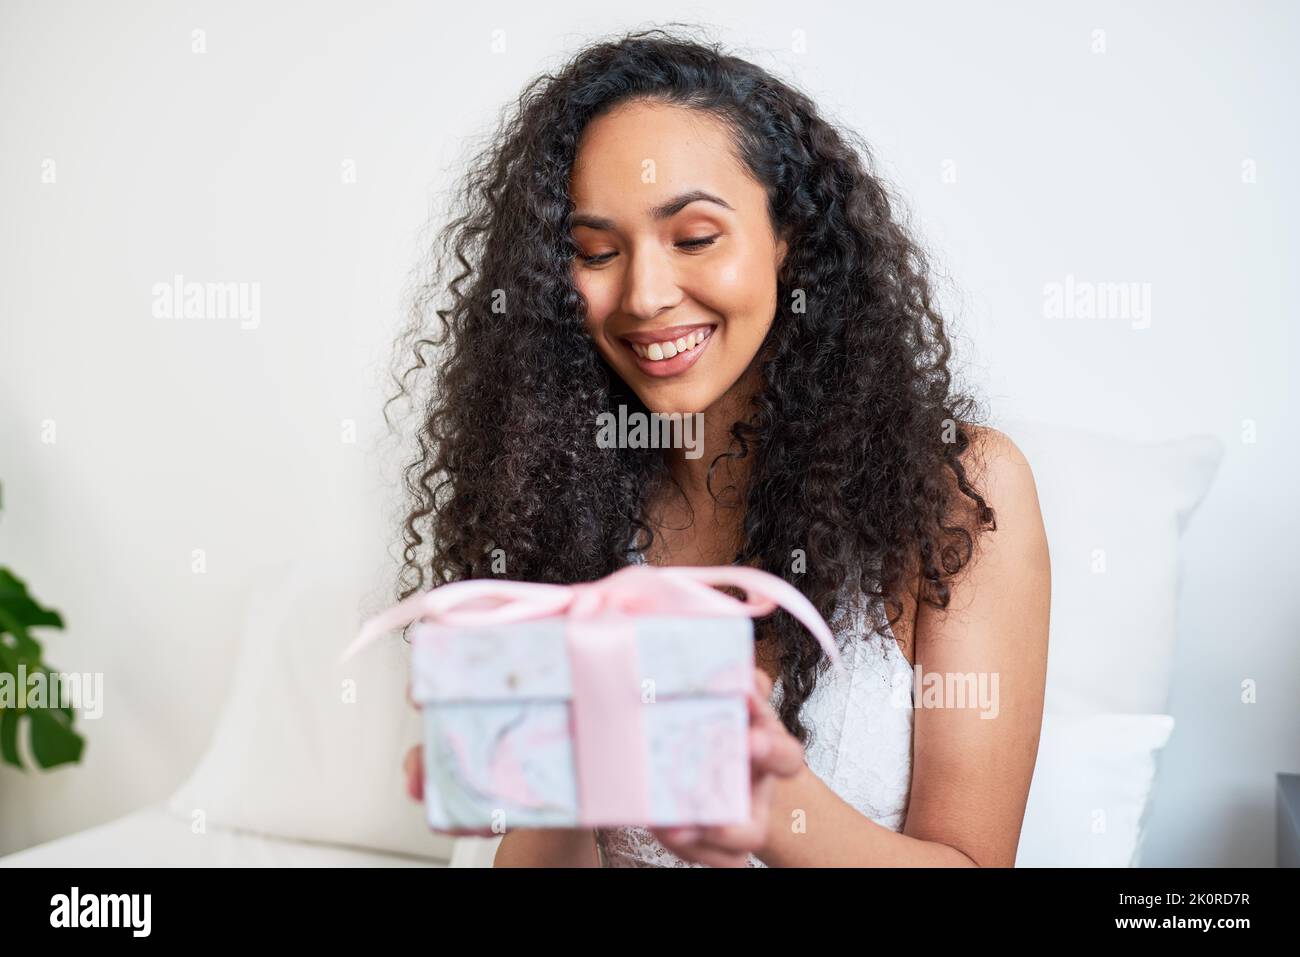 A beautiful young woman receives a gift in bed for special occasion  Stock Photo